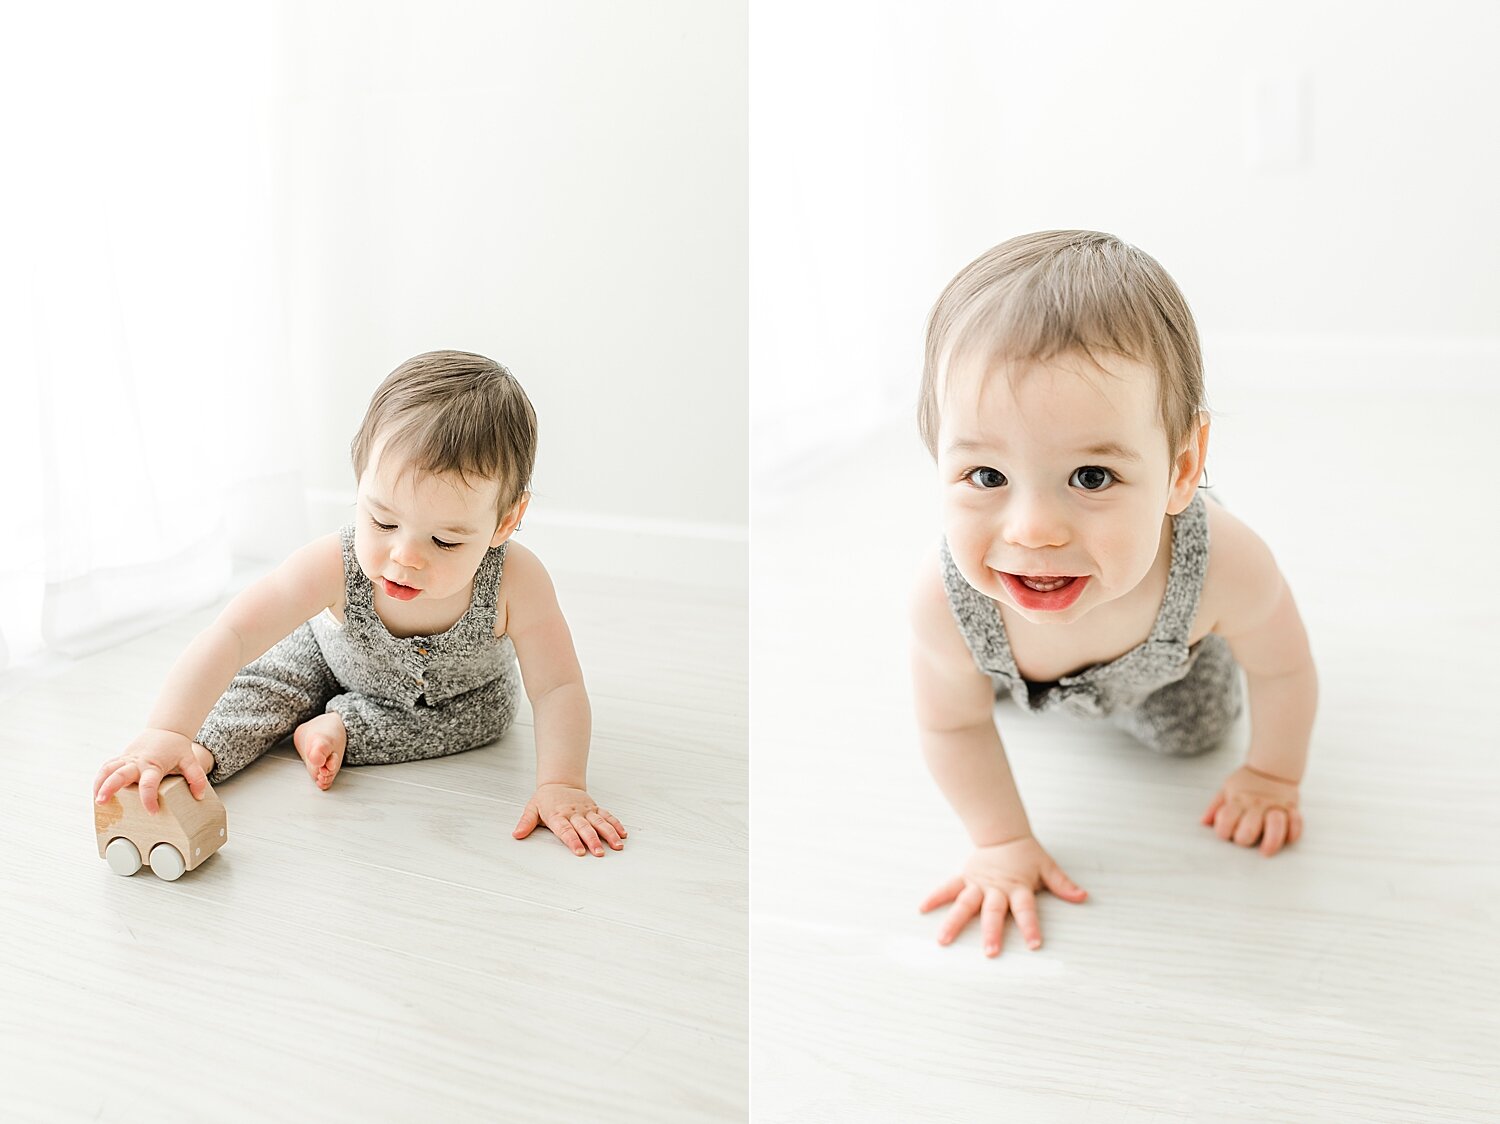 One year old boy playing with a wood truck during photoshoot with Kristin Wood Photography.